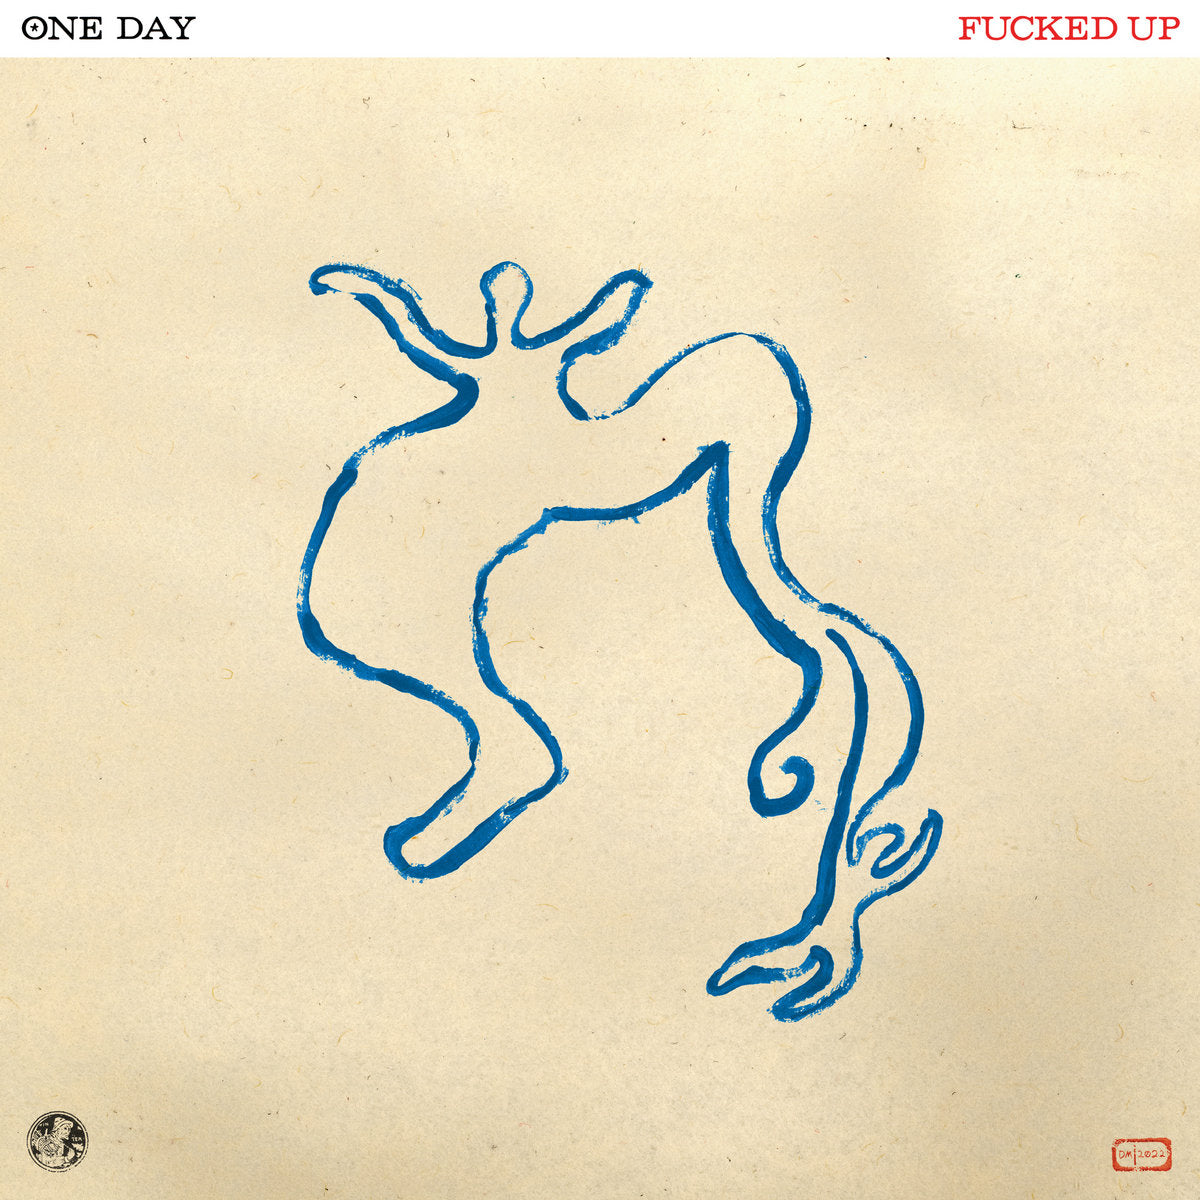 FUCKED UP "One Day" CD